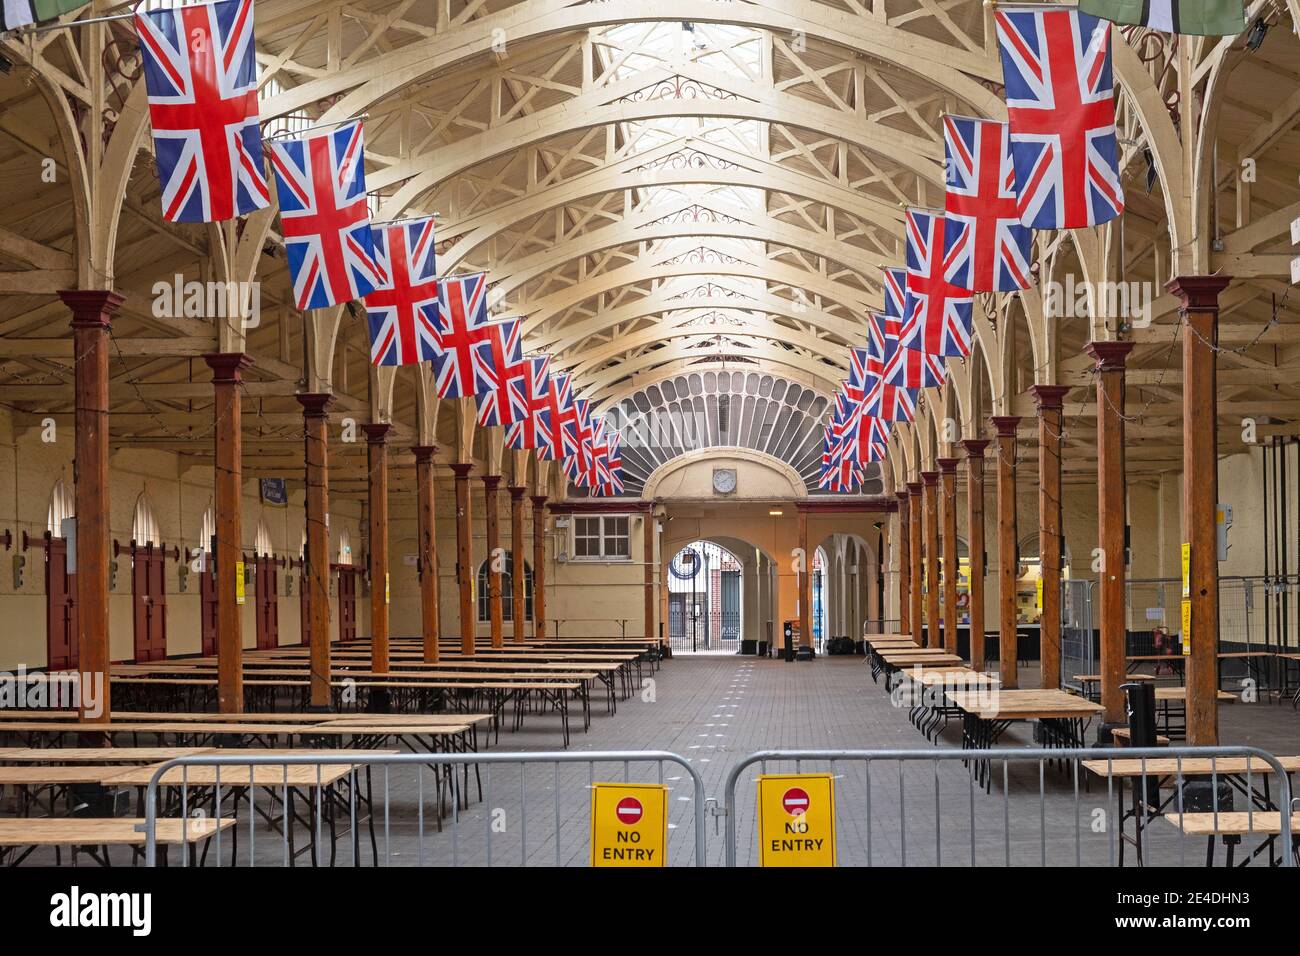 The Victorian pannier market adorned by rows of the national flag of the United Kingdom of Great Britain and Northern Ireland Stock Photo